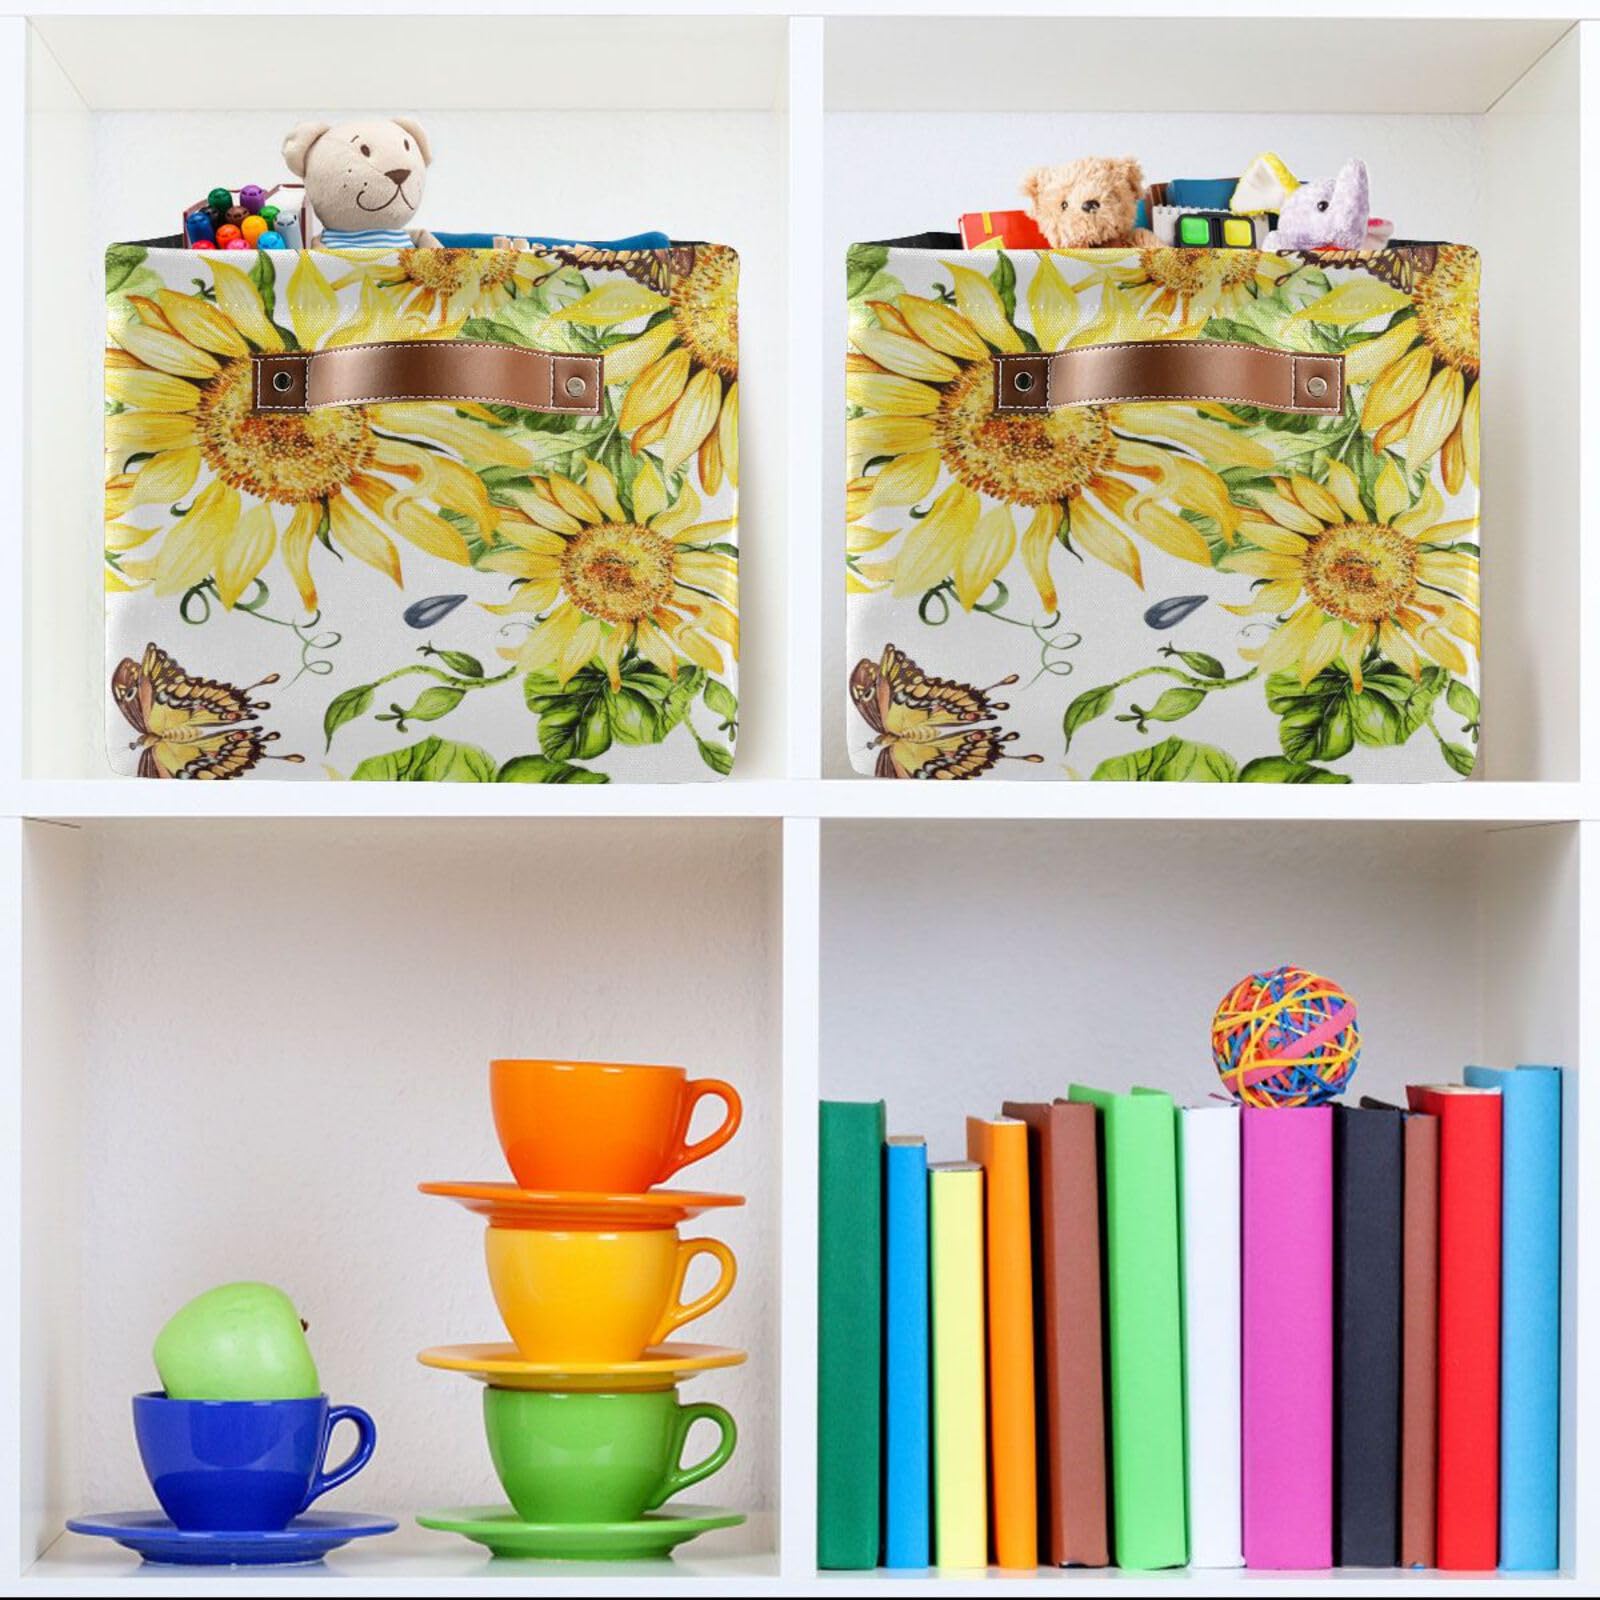 SDMKA Fabric Storage Baskets Beautiful Watercolor Sunflower Foldable Baskets Large Storage Bins for Organizing Shelves Closet Home, Decorate Your Rooms